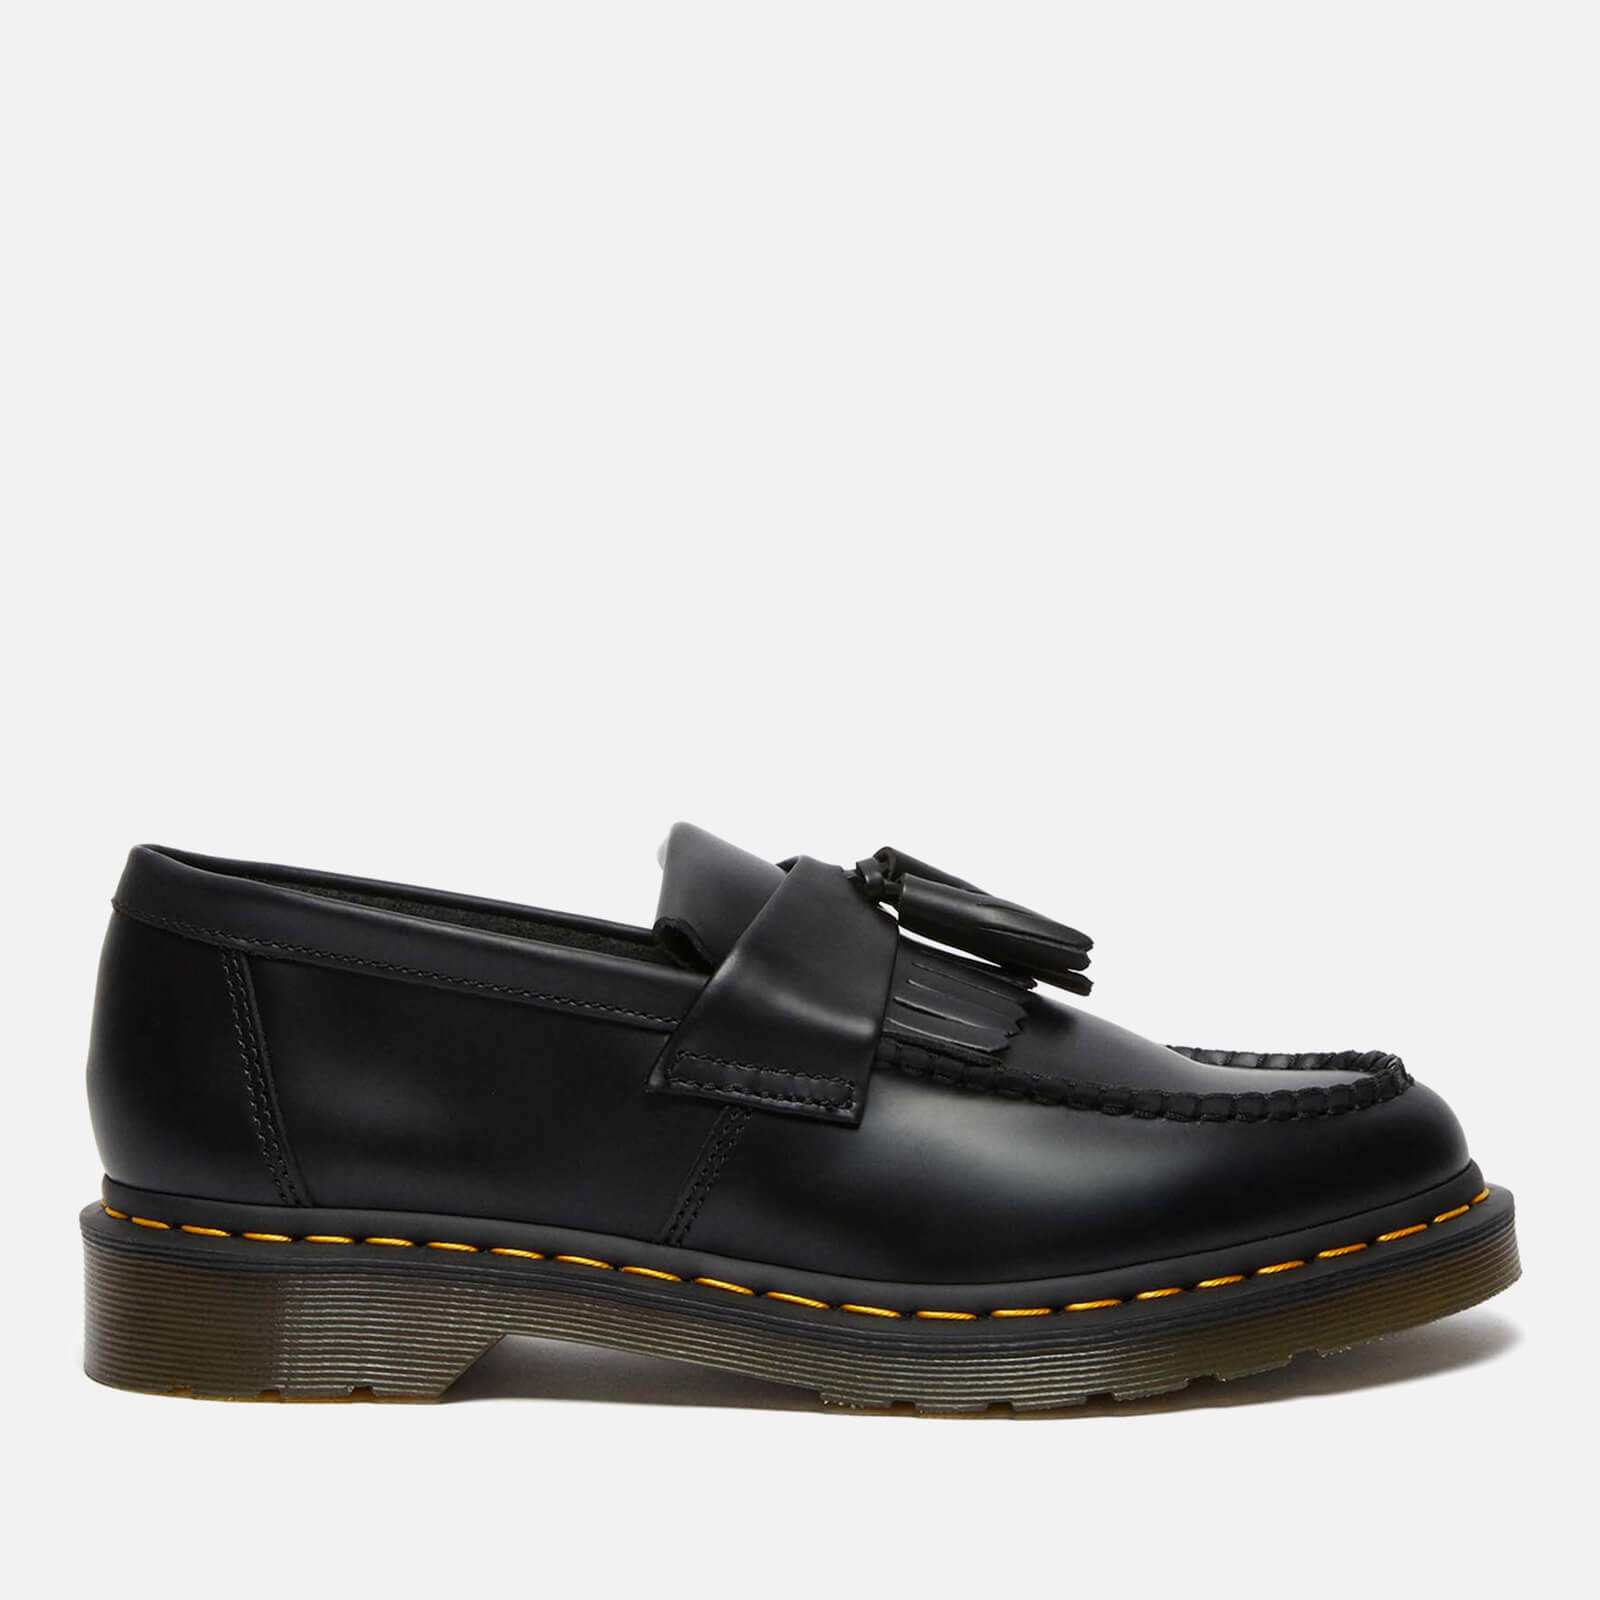 Dr. Martens Adrian Leather Loafers - UK 4